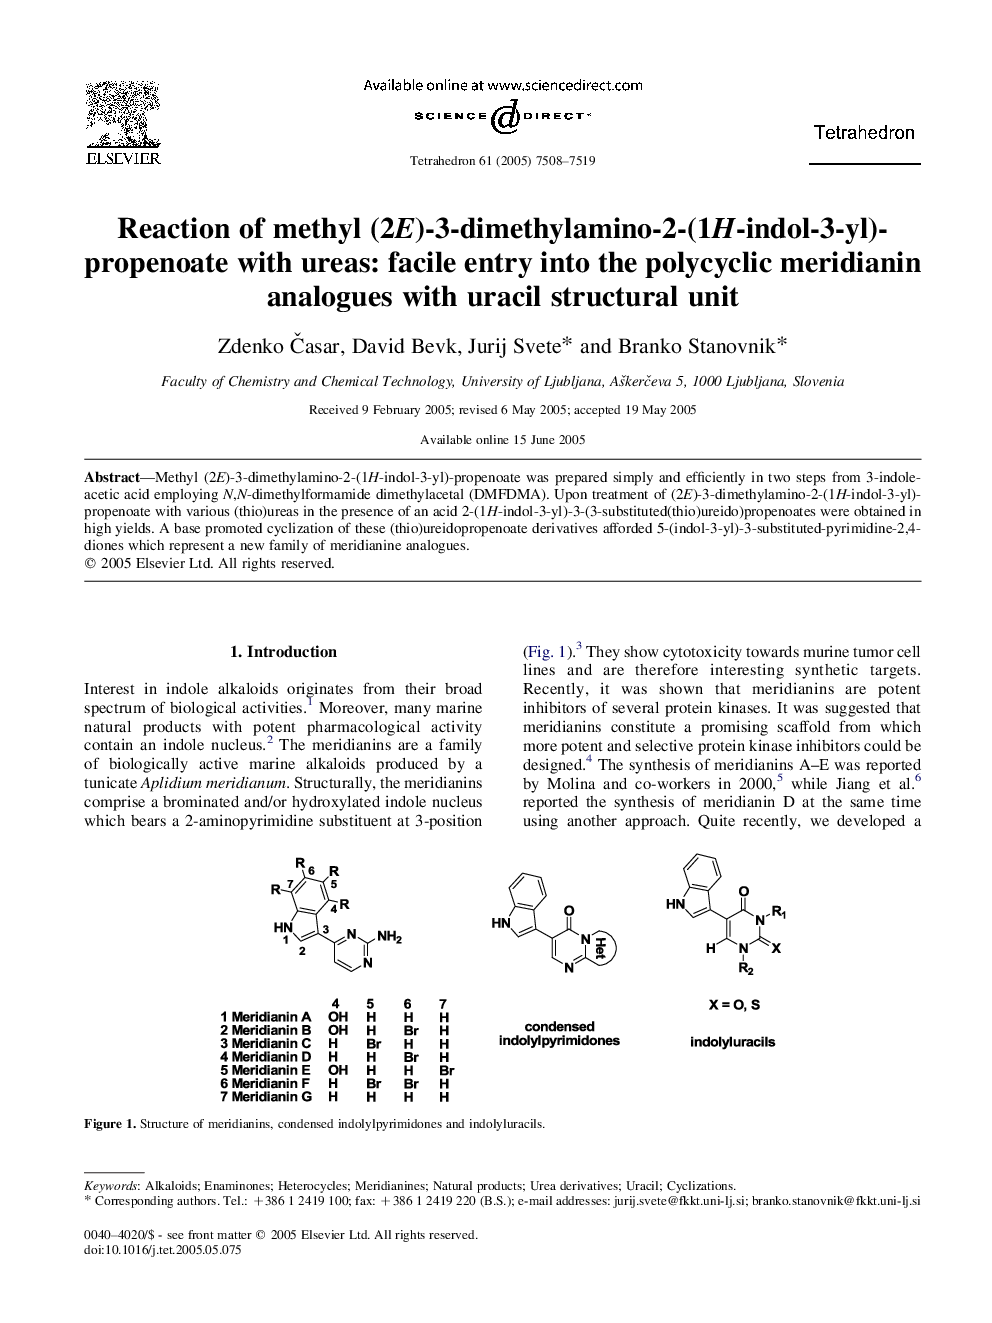 Reaction of methyl (2E)-3-dimethylamino-2-(1H-indol-3-yl)-propenoate with ureas: facile entry into the polycyclic meridianin analogues with uracil structural unit